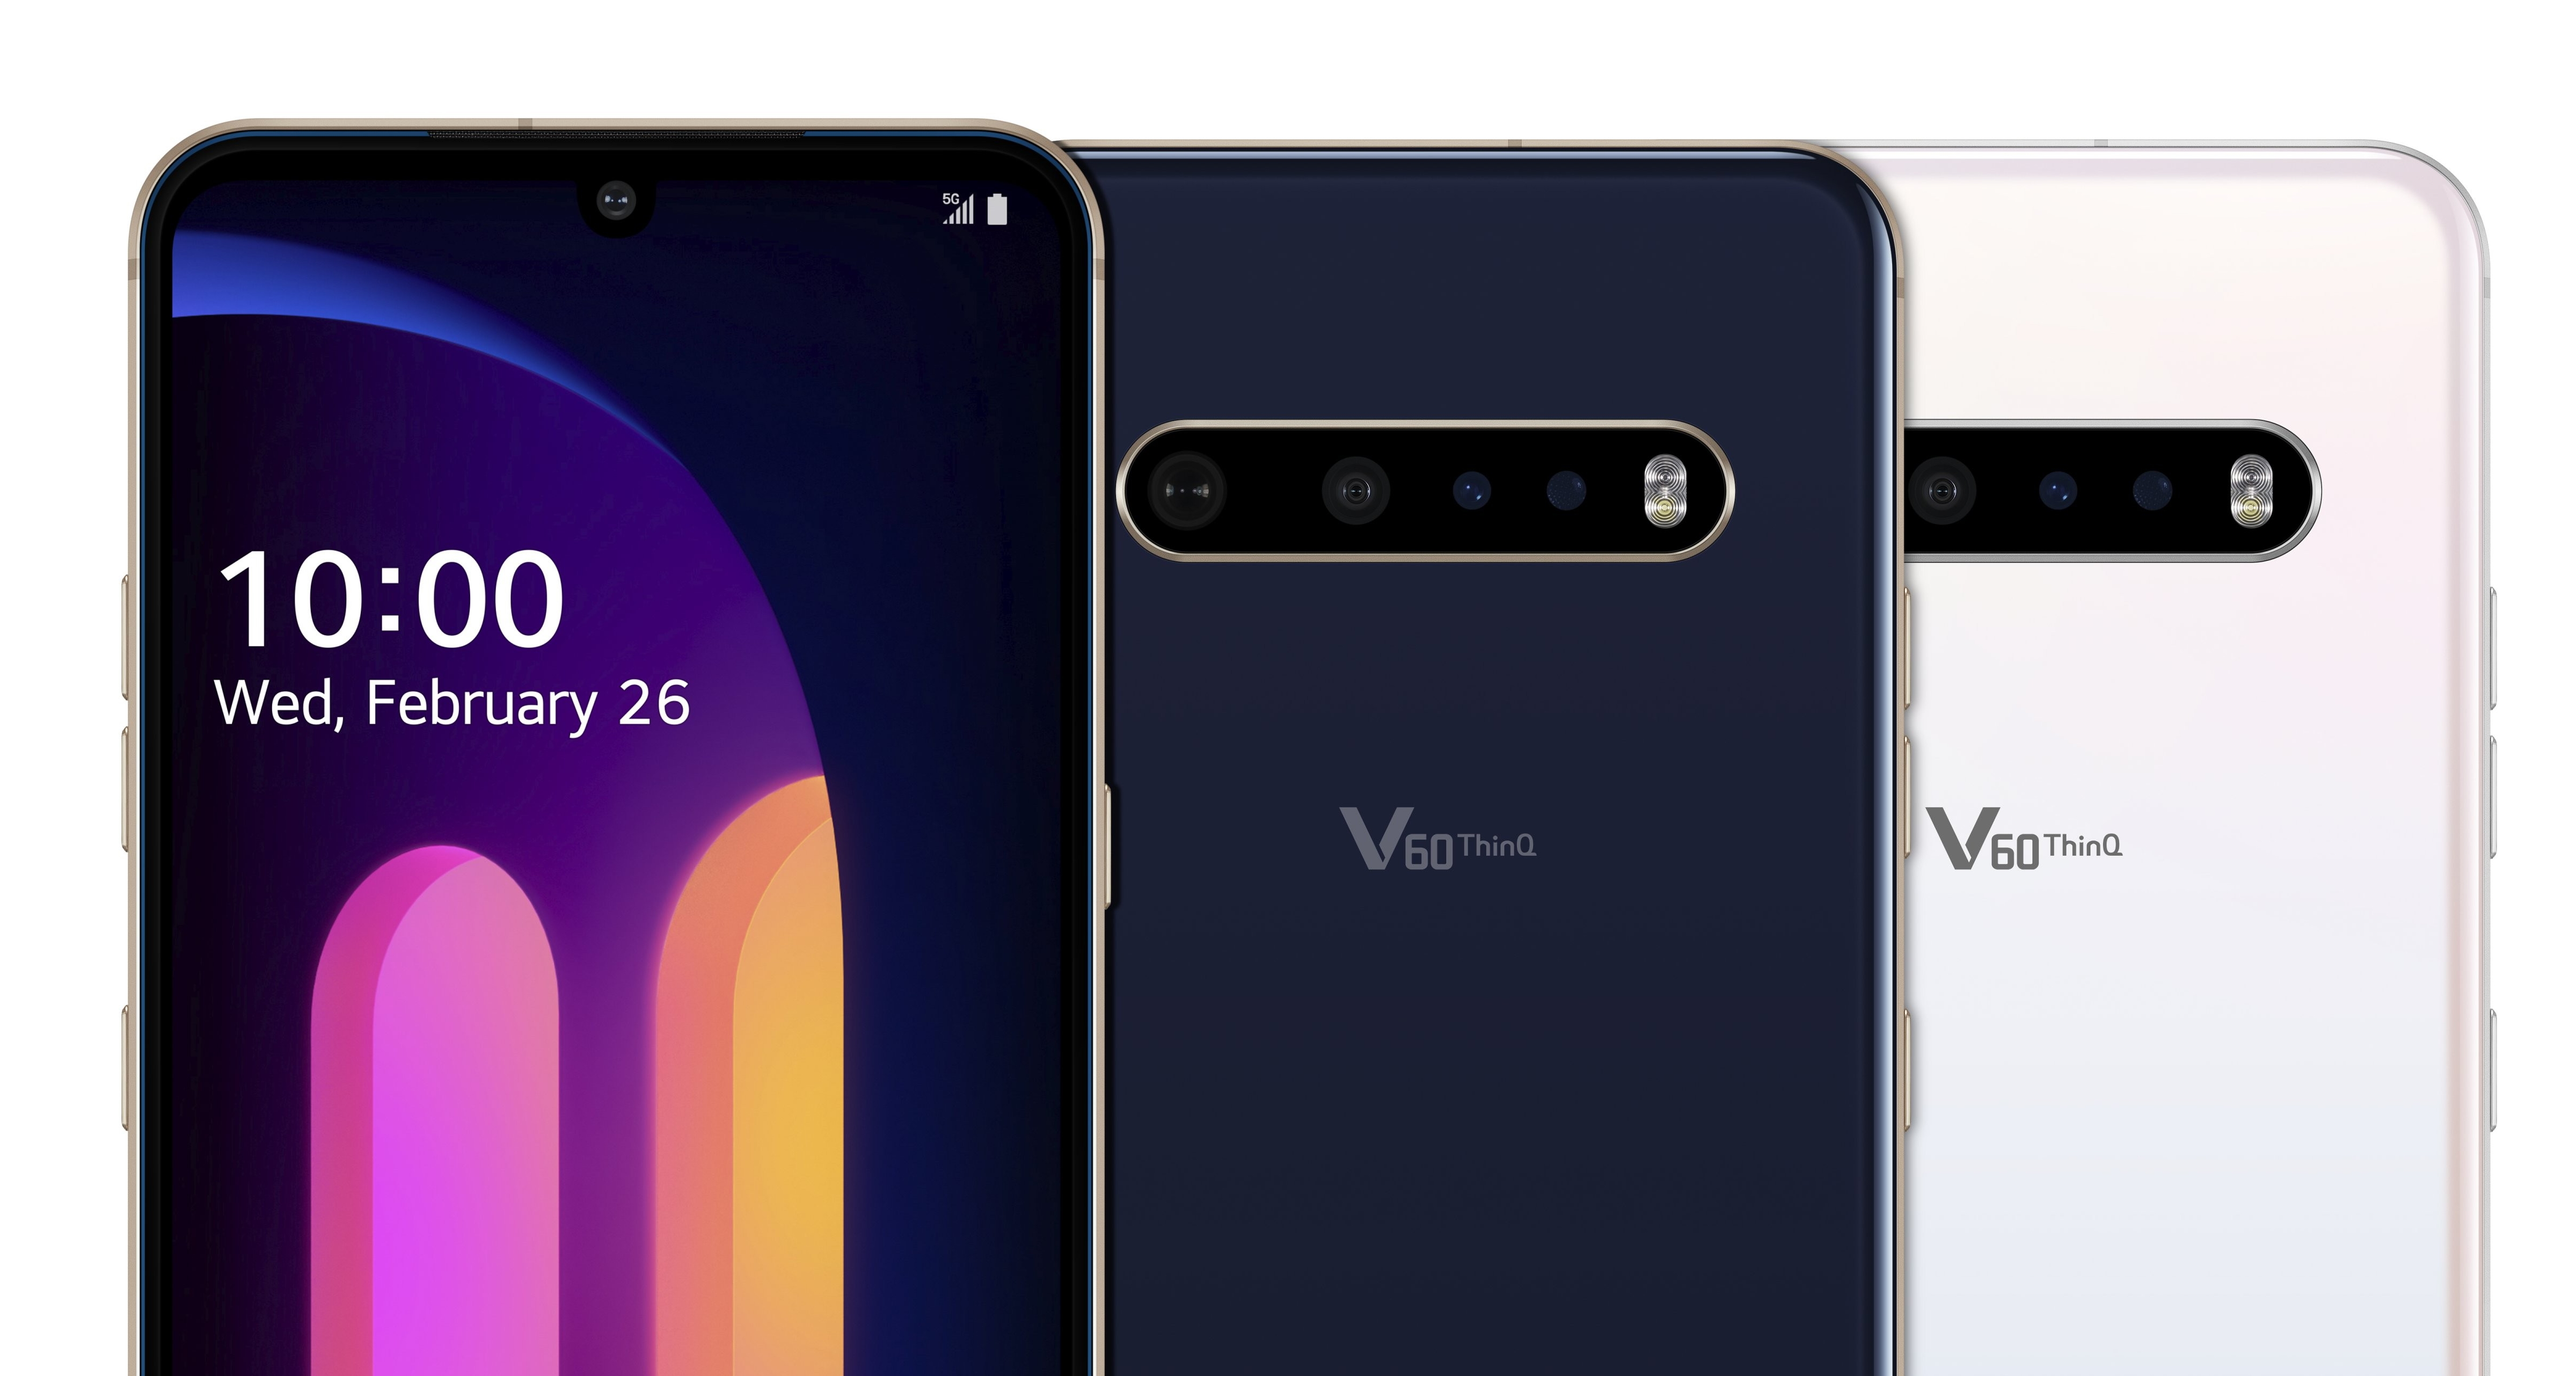 LG V60 ThinQ 5G: A smartphone fan's dream, but one held back by 